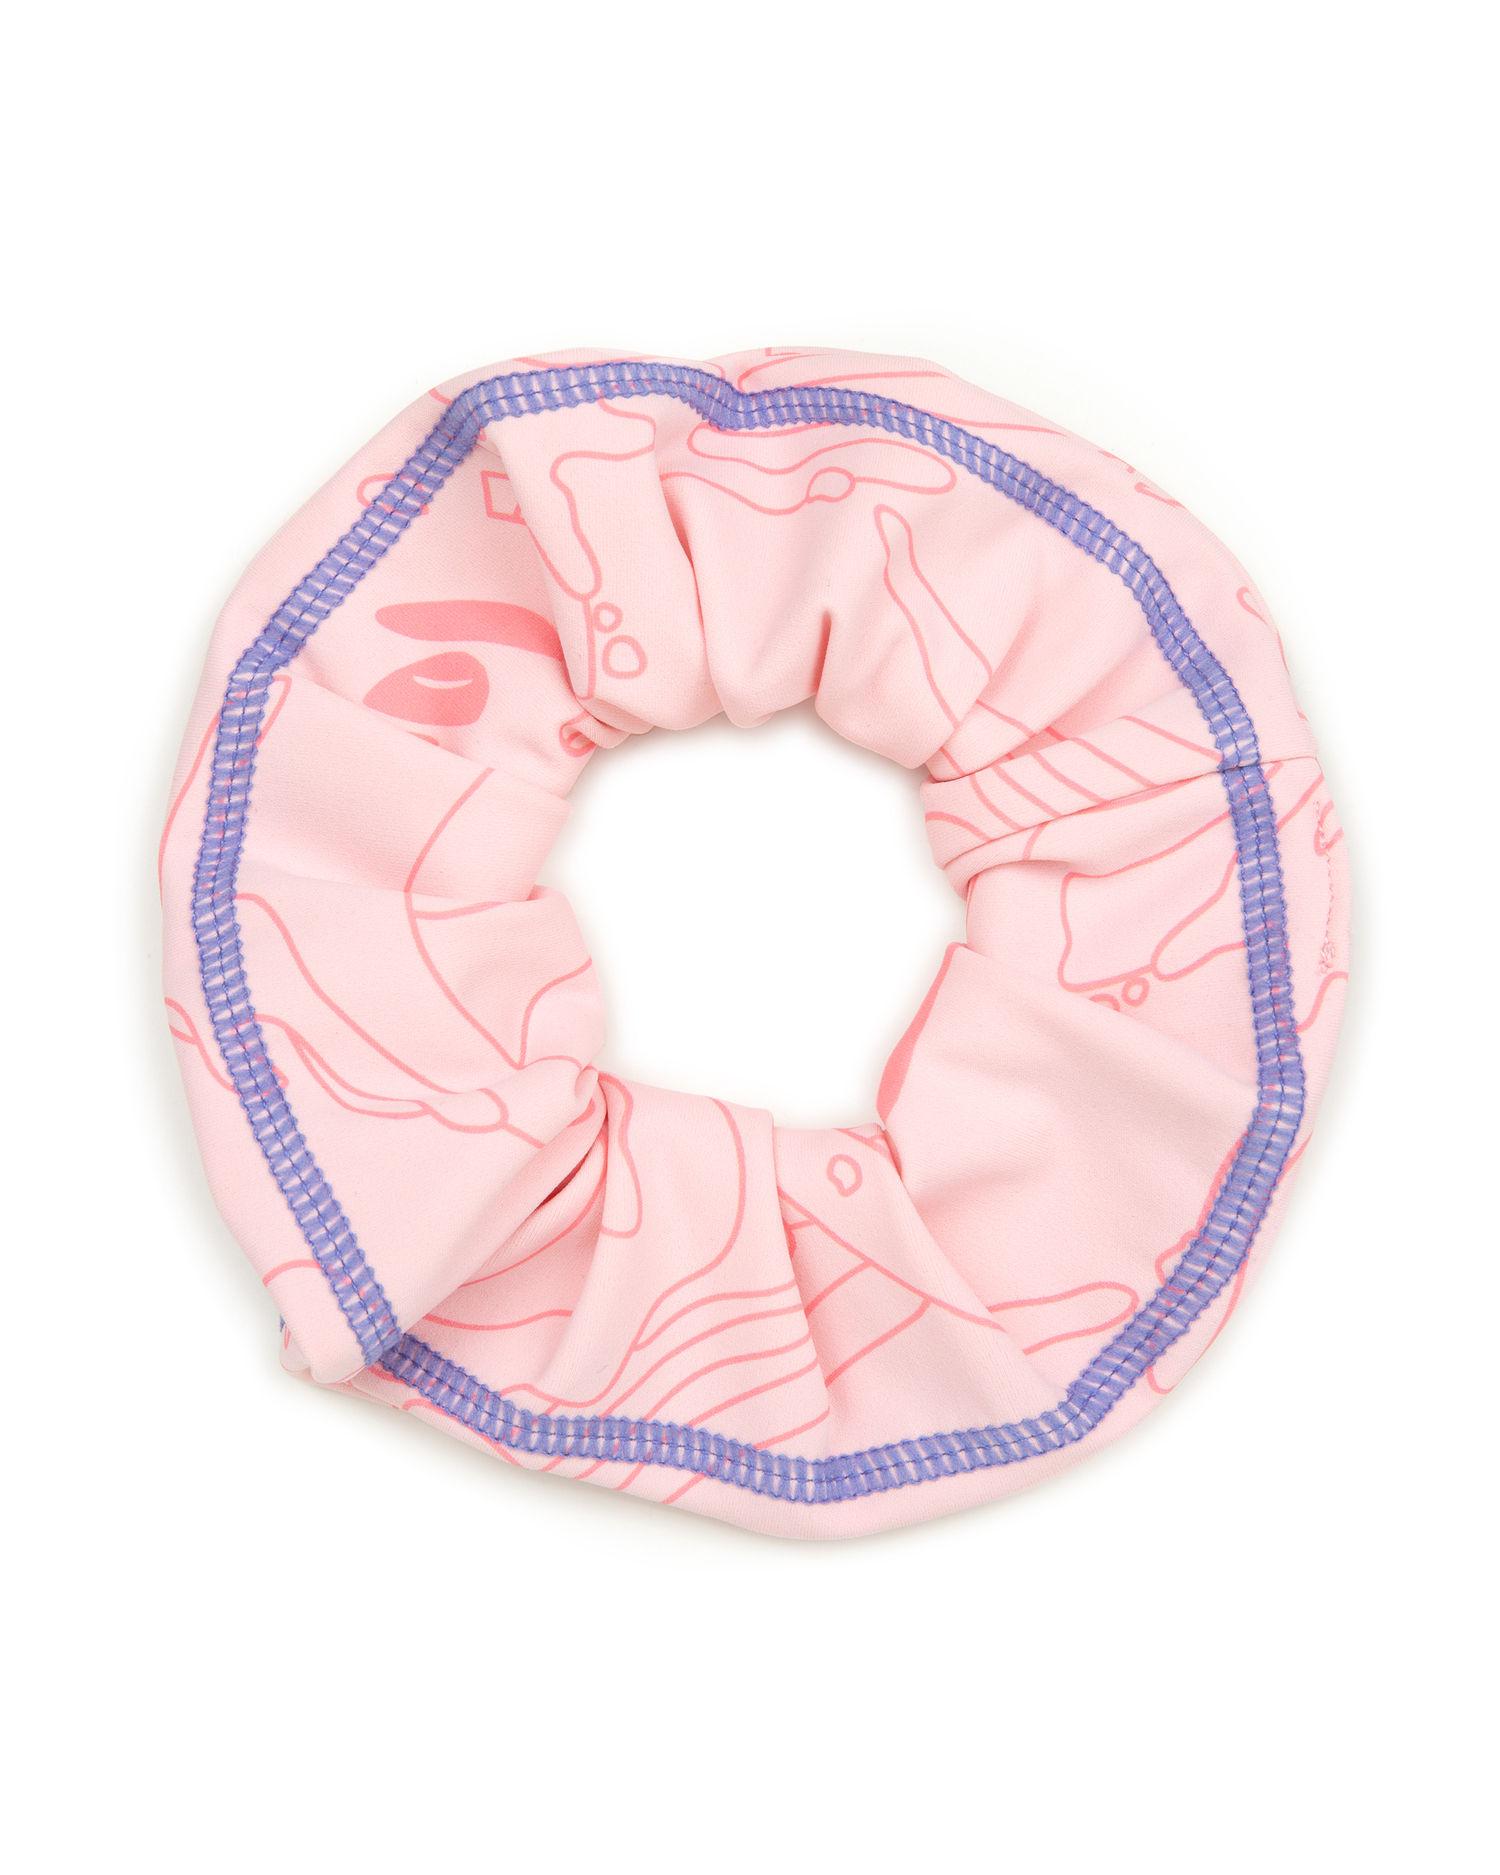 Moonface patterned scrunchie by AAPE